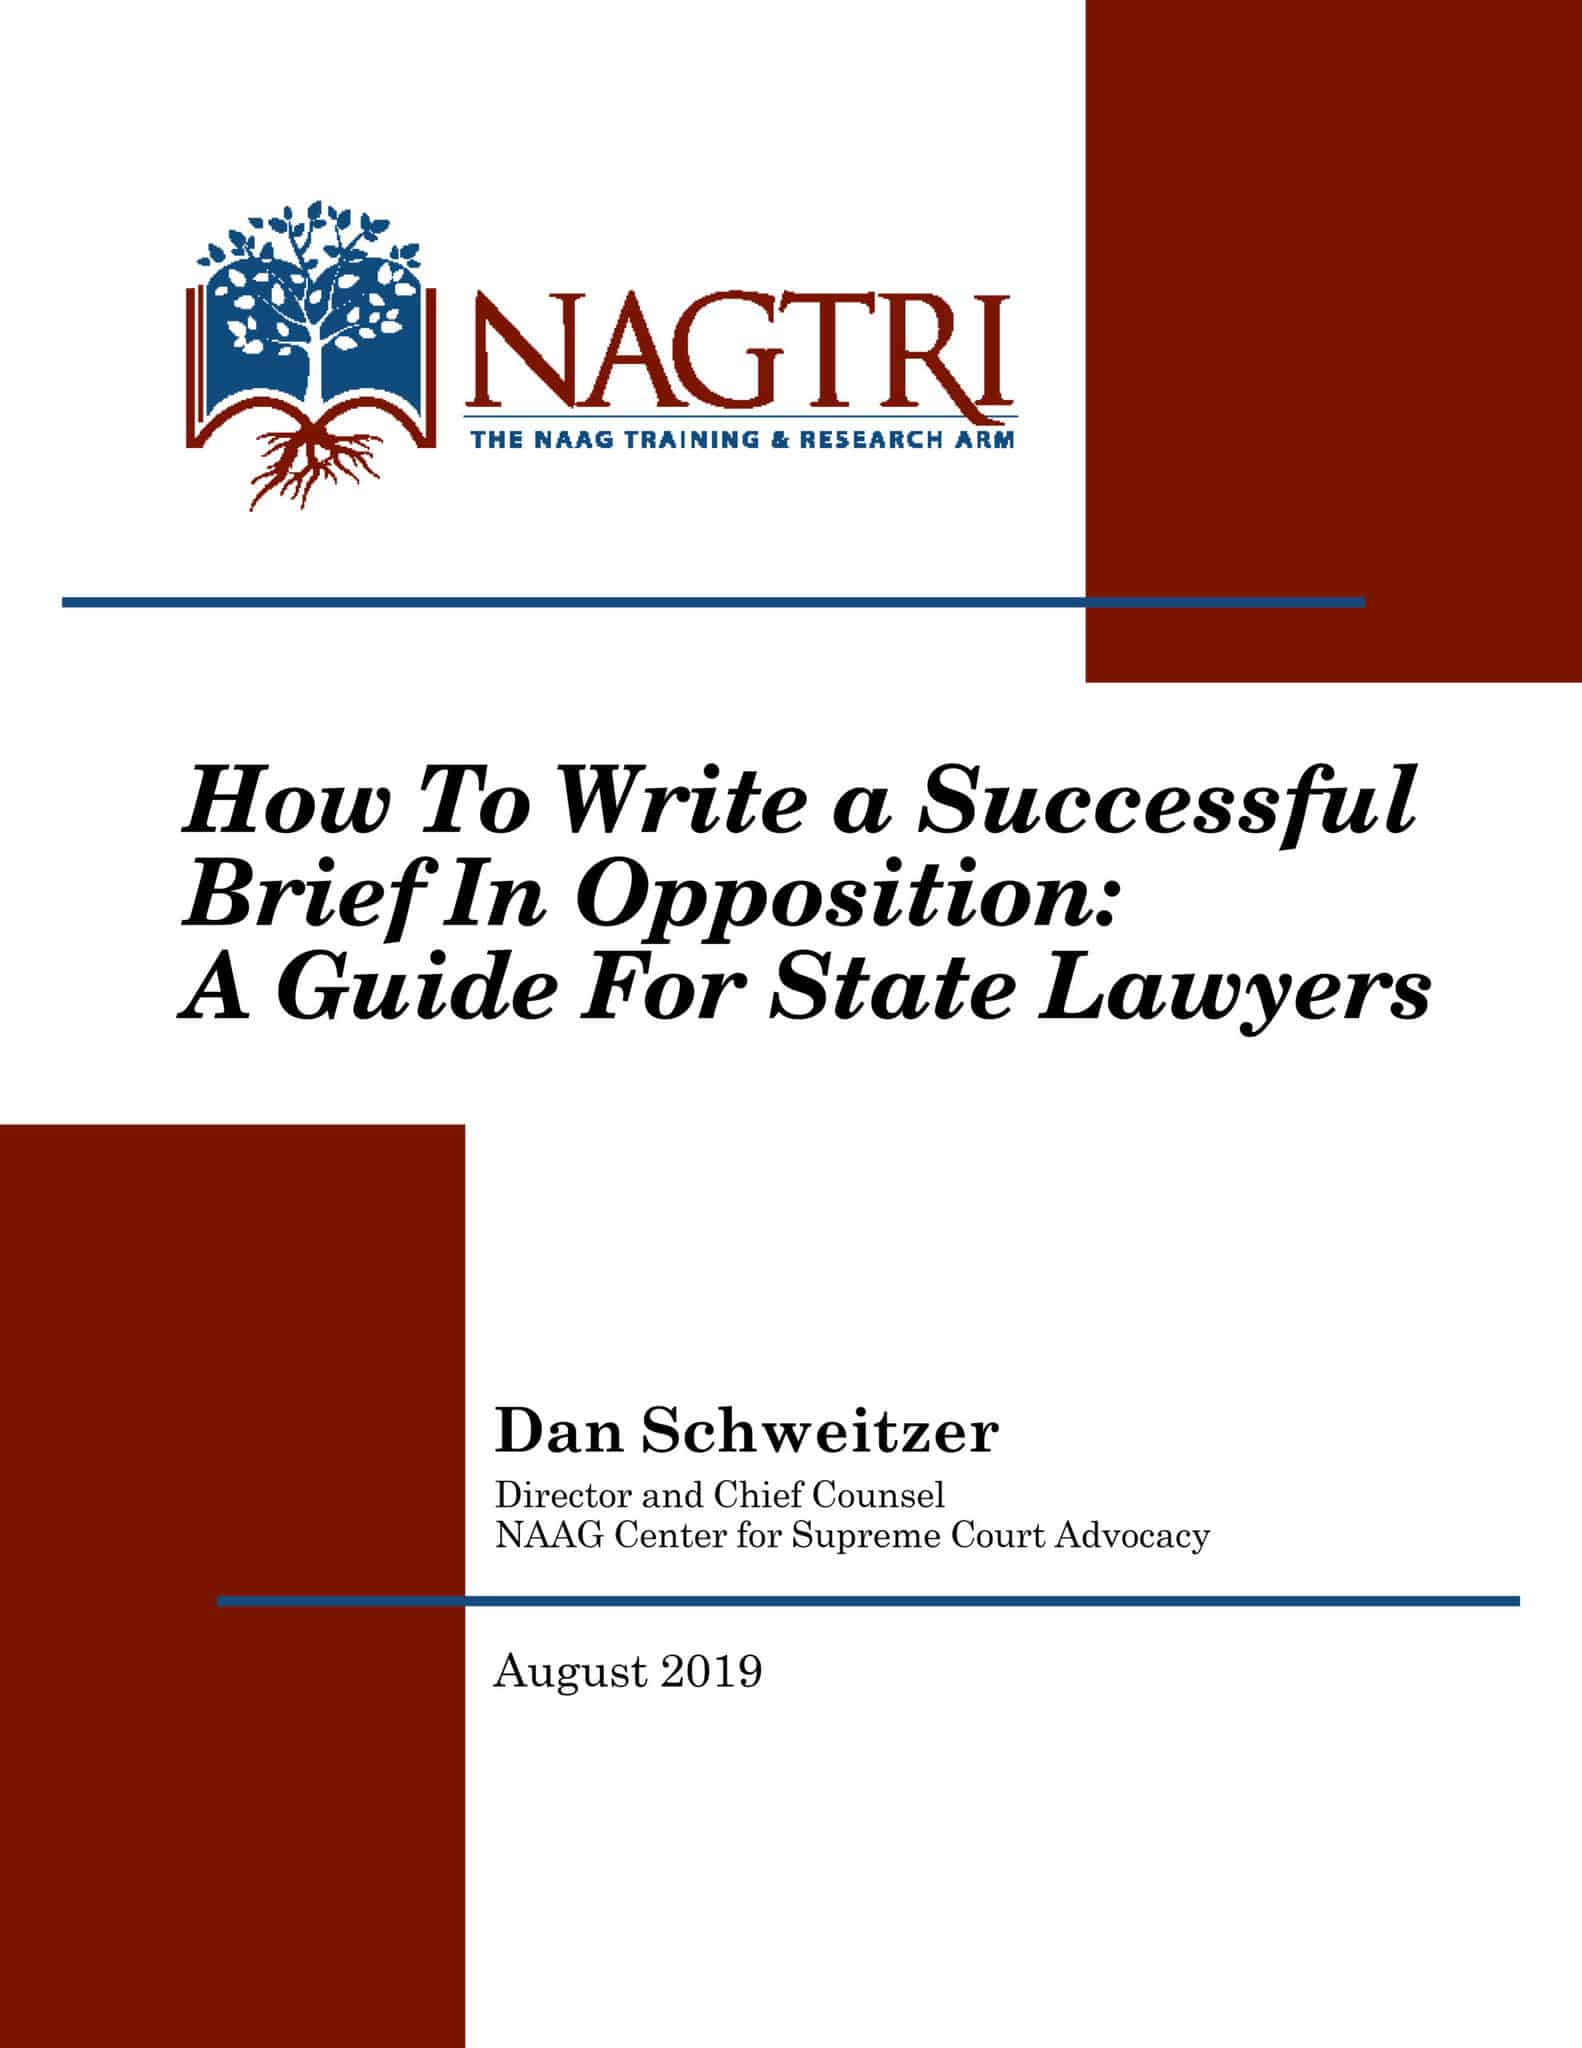 How To Write a Successful Brief In Opposition: A Guide For State